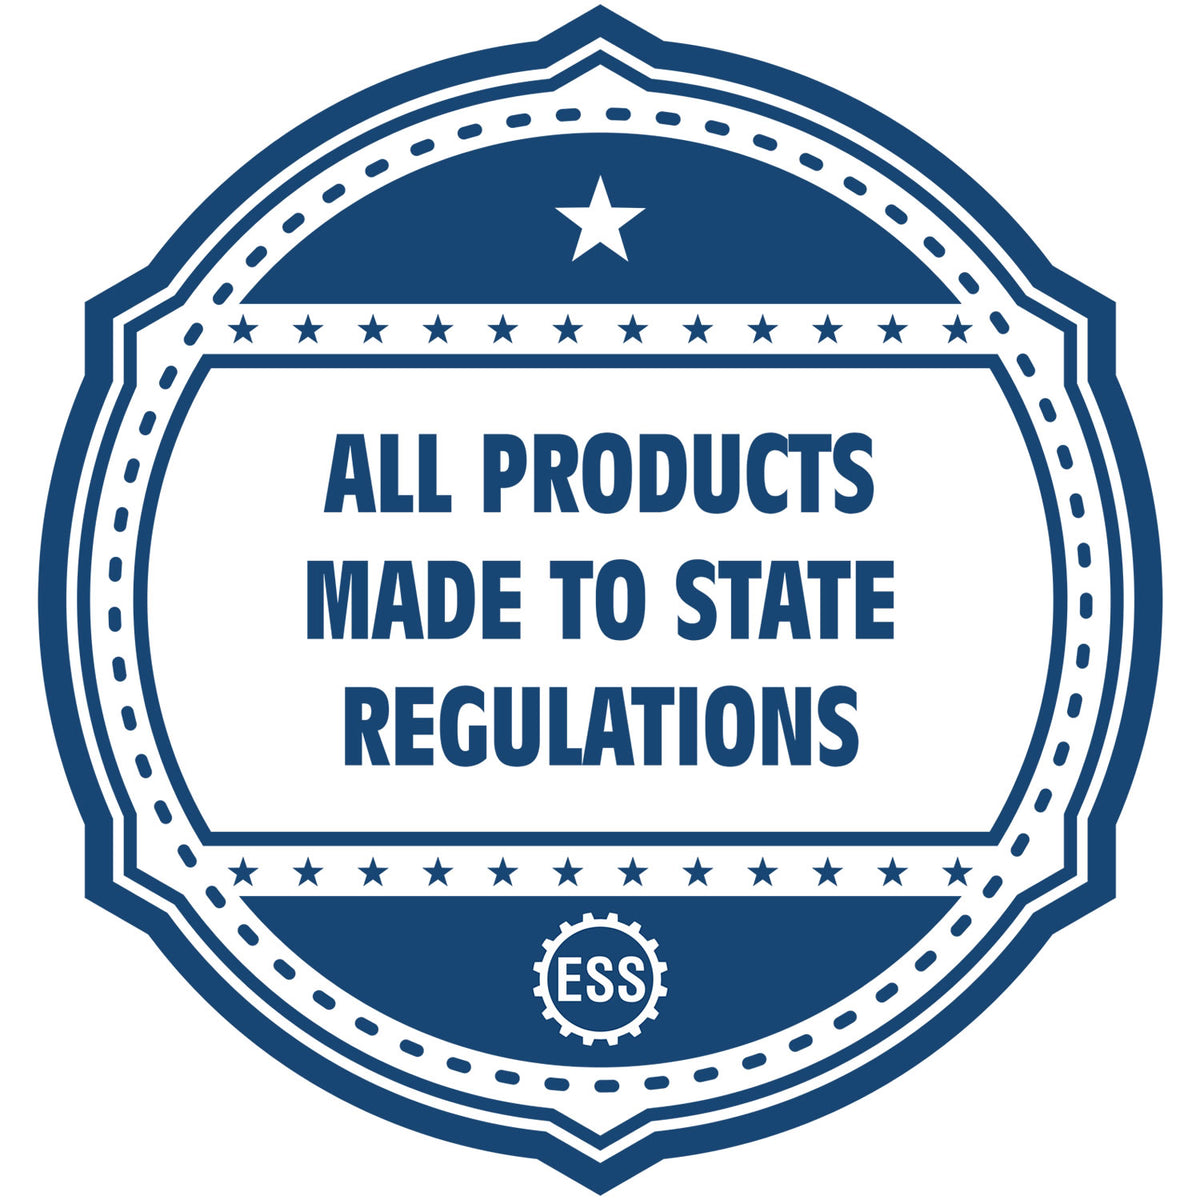 An icon or badge element for the Long Reach Delaware PE Seal showing that this product is made in compliance with state regulations.